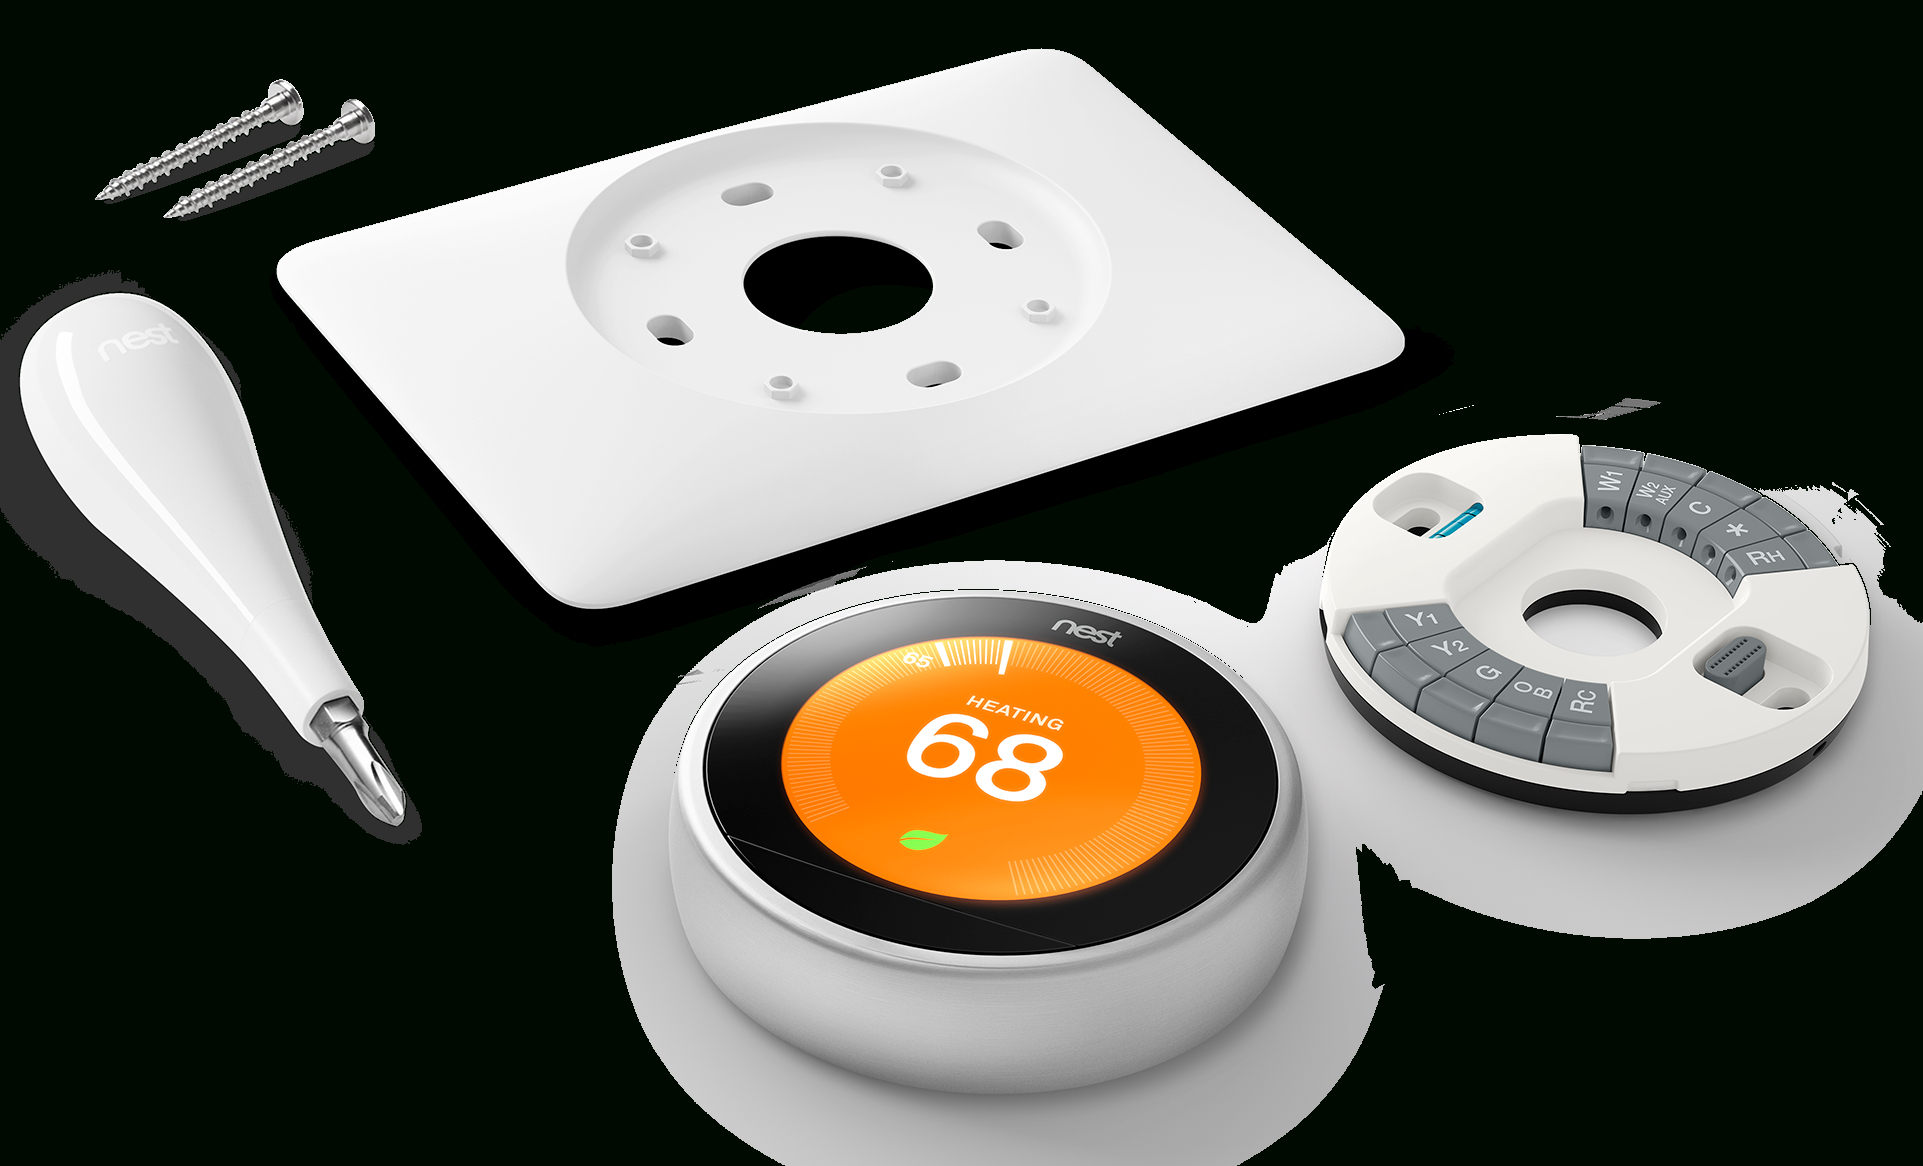 How To Install Your Nest Thermostat - Nest E Wiring Diagram